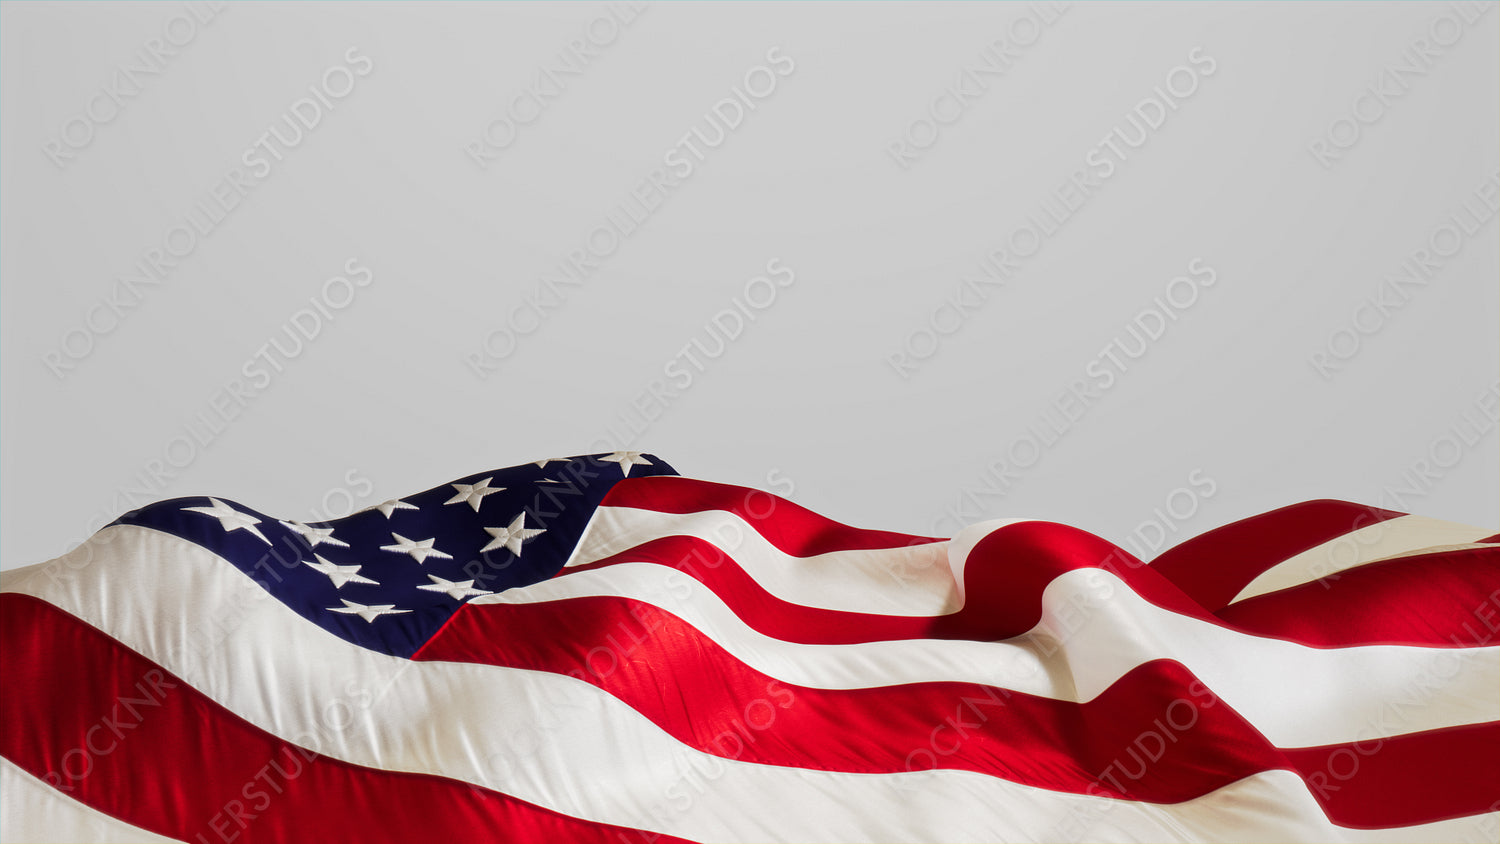 Patriot Day Banner with US Flag, Isolated on White Background with Copy-Space.